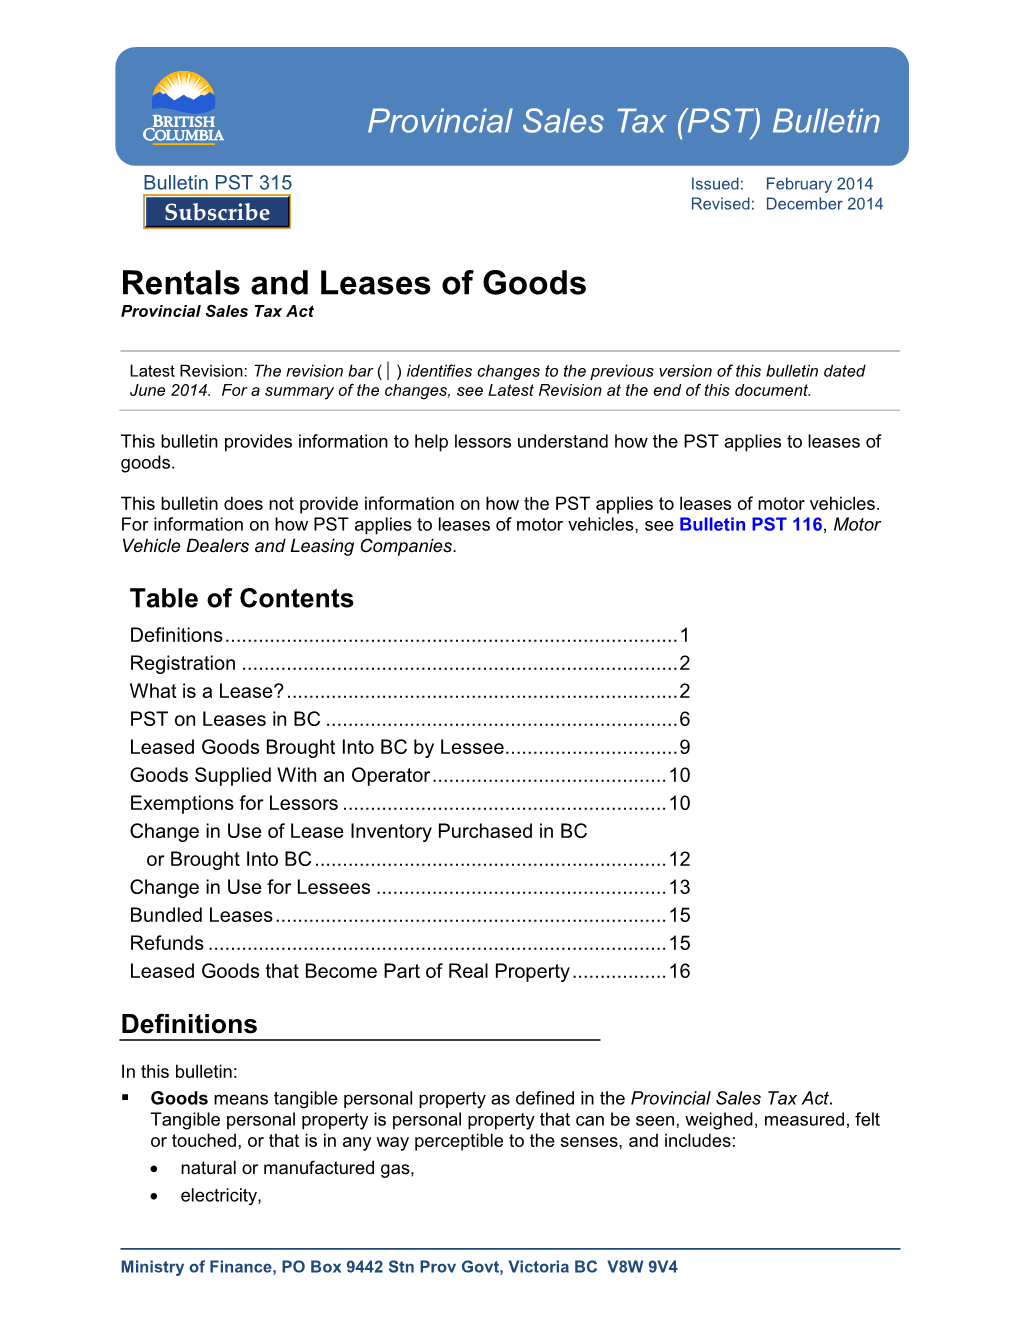 Rentals and Leases of Goods Provincial Sales Tax Act